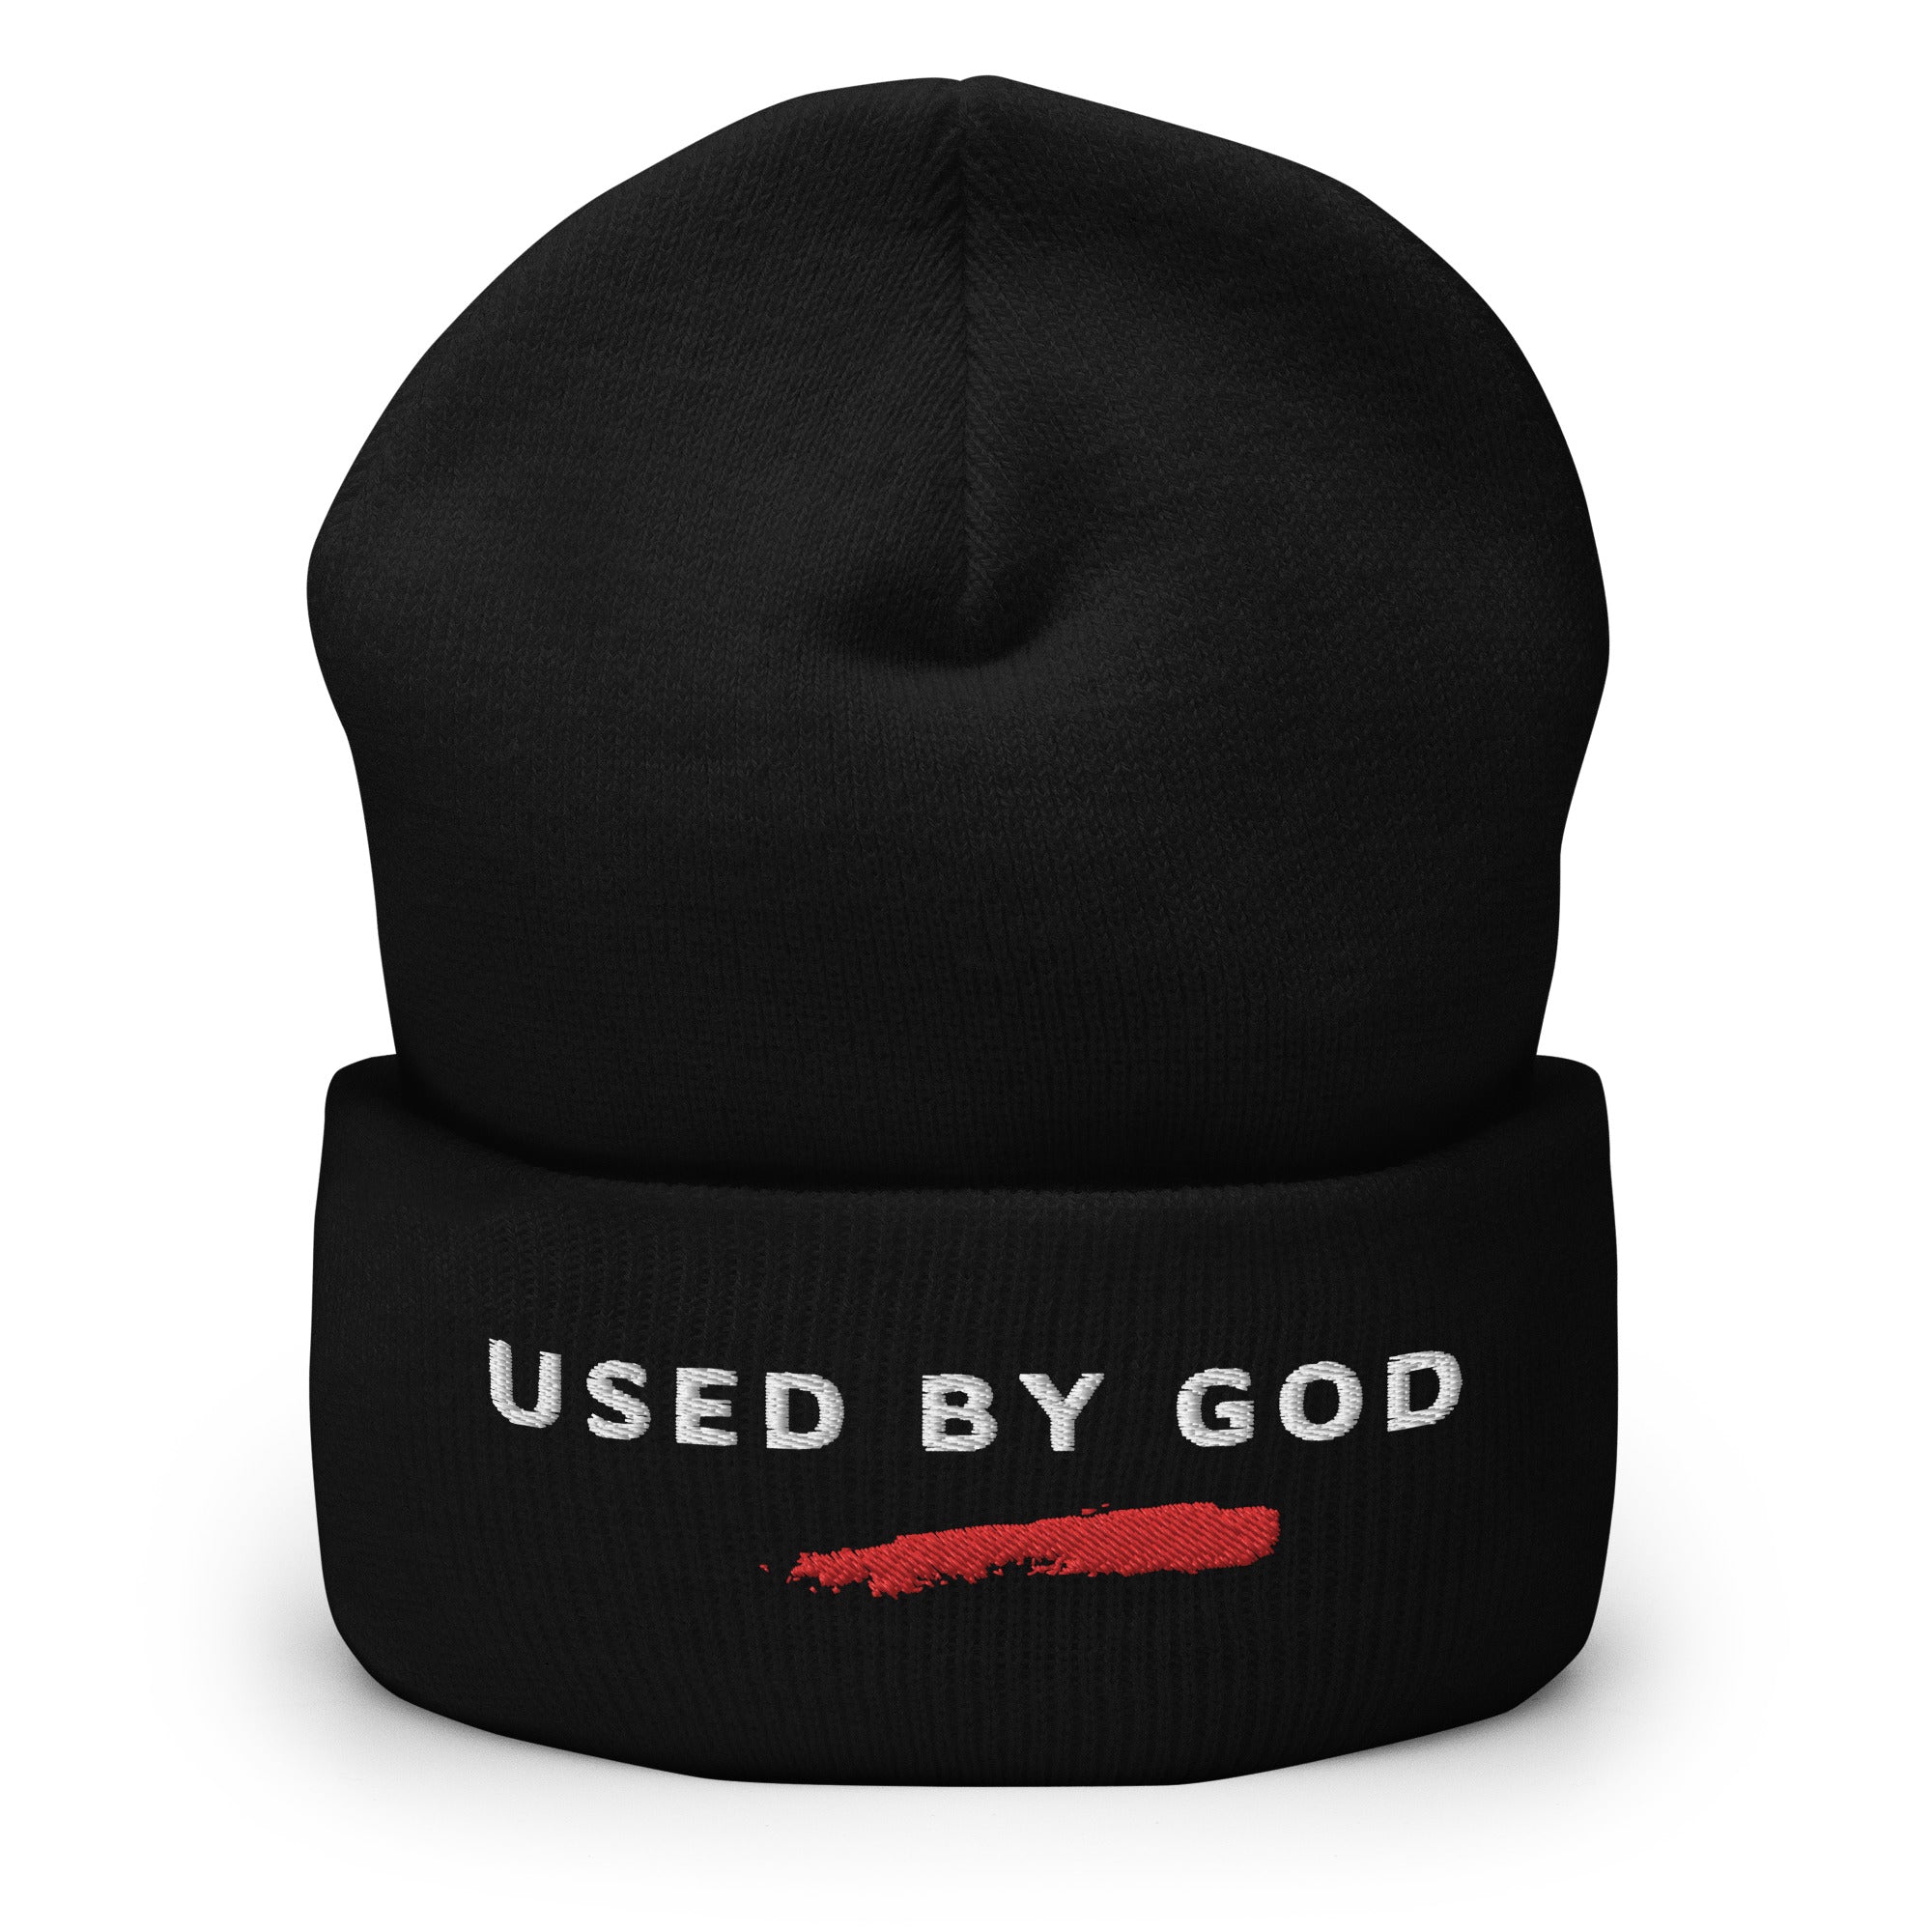 God's Plan Is My Plan Beanie, christian hats, christian apparel, christmas gift, christian clothing, used by god clothing, ubg clothing, elevated faith, active faith, god is dope, 3:16 collection, beanie, cuffed beanie, designer beanie, god's plan is my plan, christian t-shirt, christian shirt, christian clothing brand, favored by god, god's favor, god the father apparel, My Father Owns All Of This, god will make a way, by his stripes